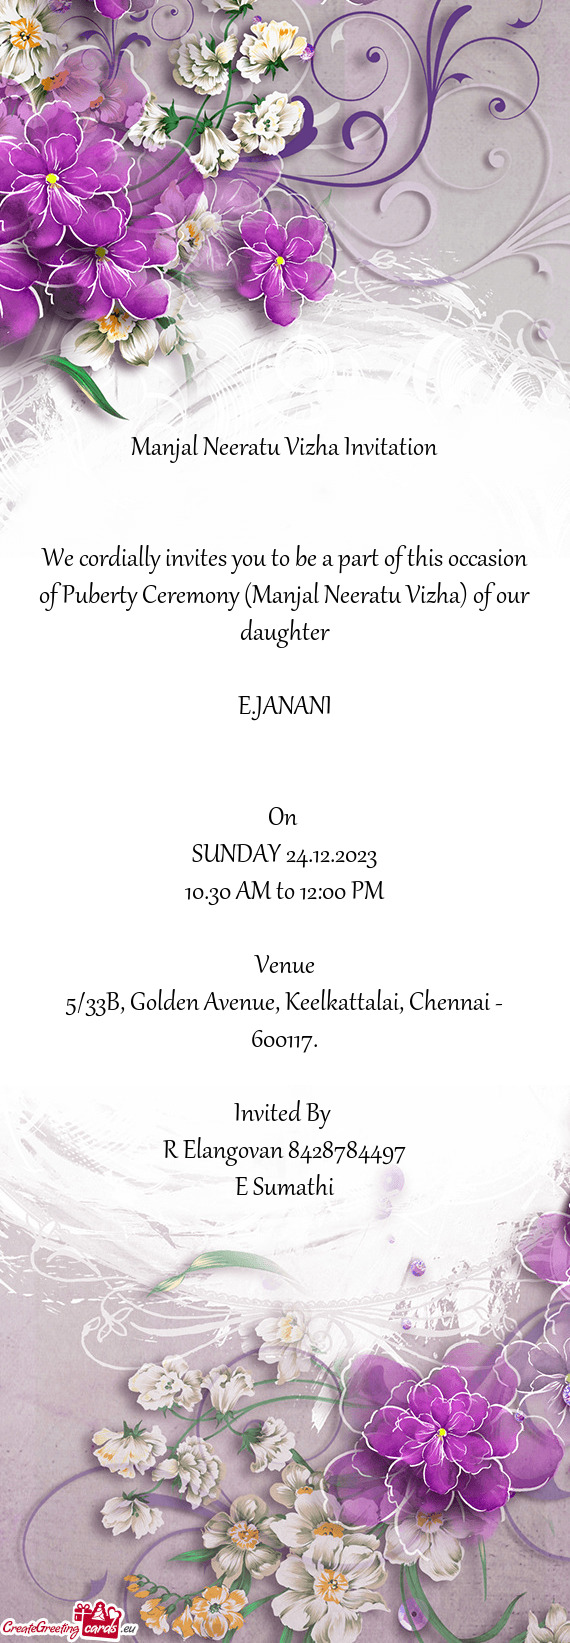 We cordially invites you to be a part of this occasion of Puberty Ceremony (Manjal Neeratu Vizha) of